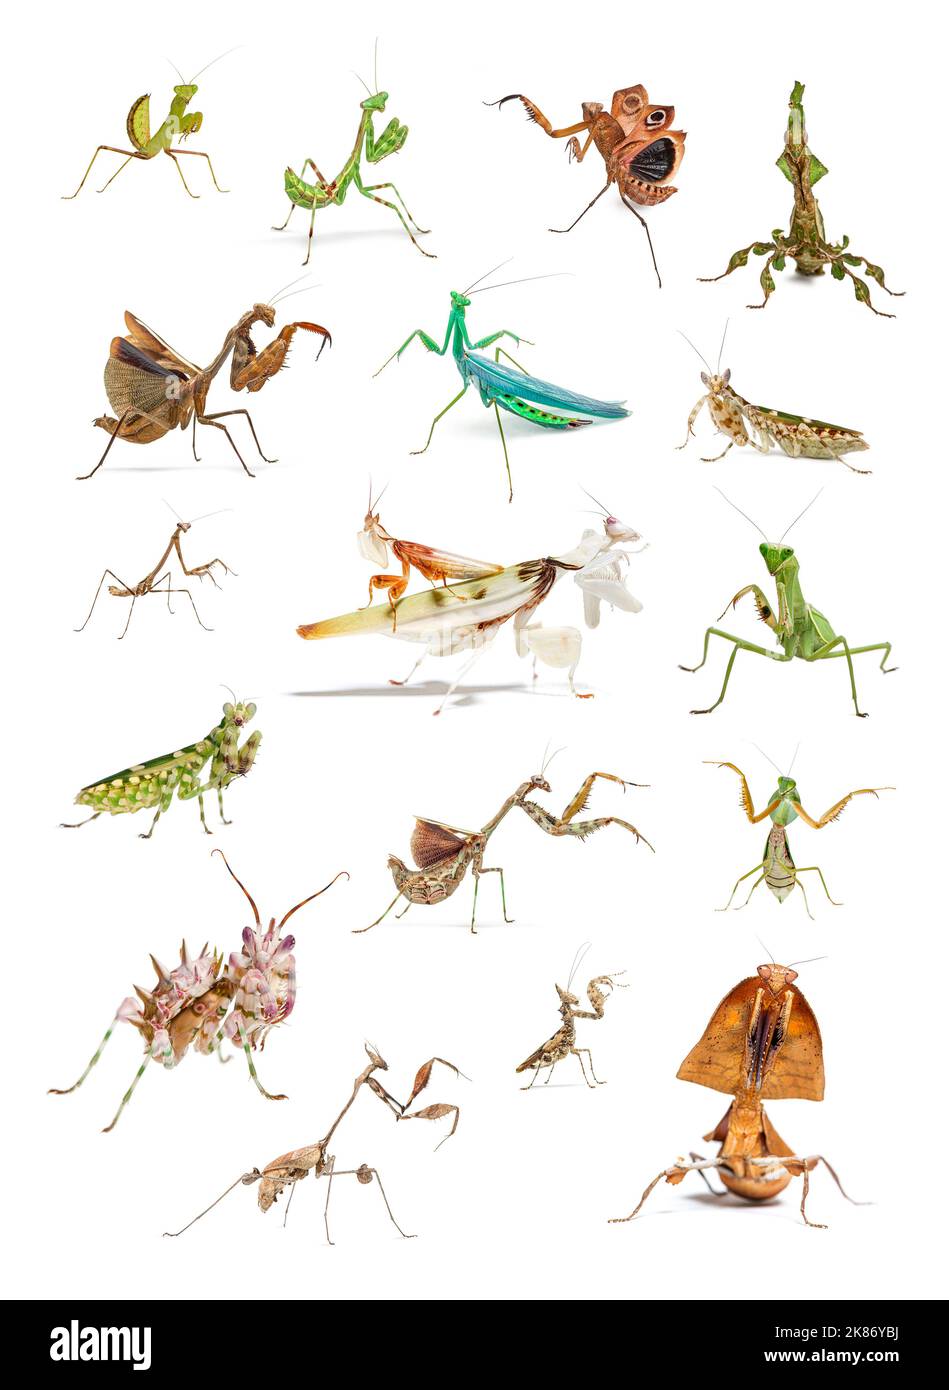 Decorative educational poster, set of many different species of praying mantis on white background Stock Photo